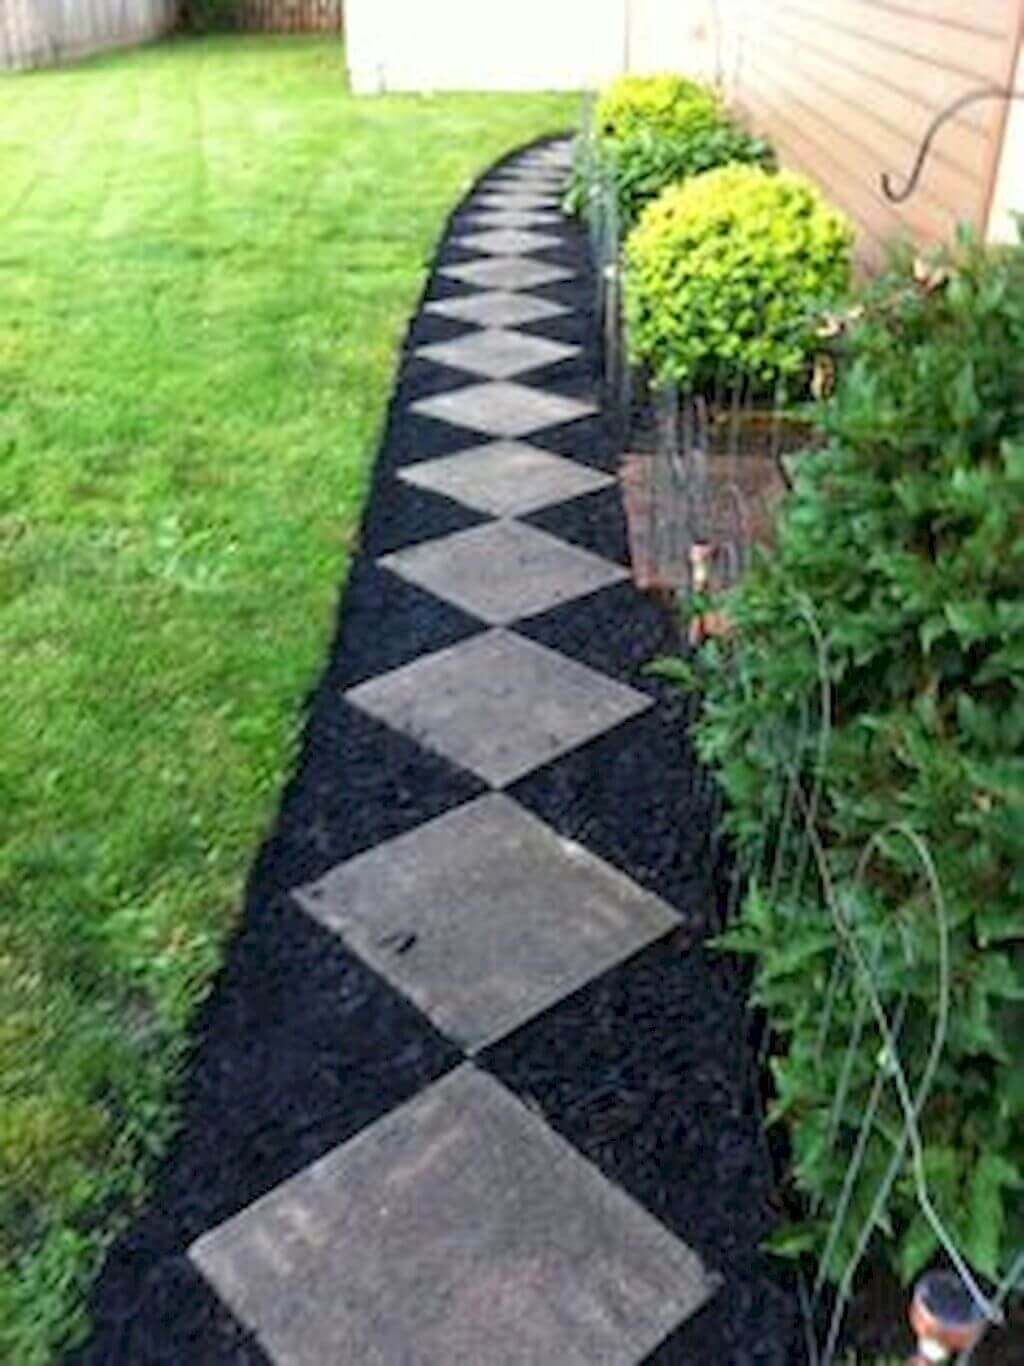 Lawn edging designs may sound like a boring topic, you will see there are some creative and interesting ideas you can put into practice to give a nicer look to your houseâ€™s landscape. For more ideas go to backyardmastery.com